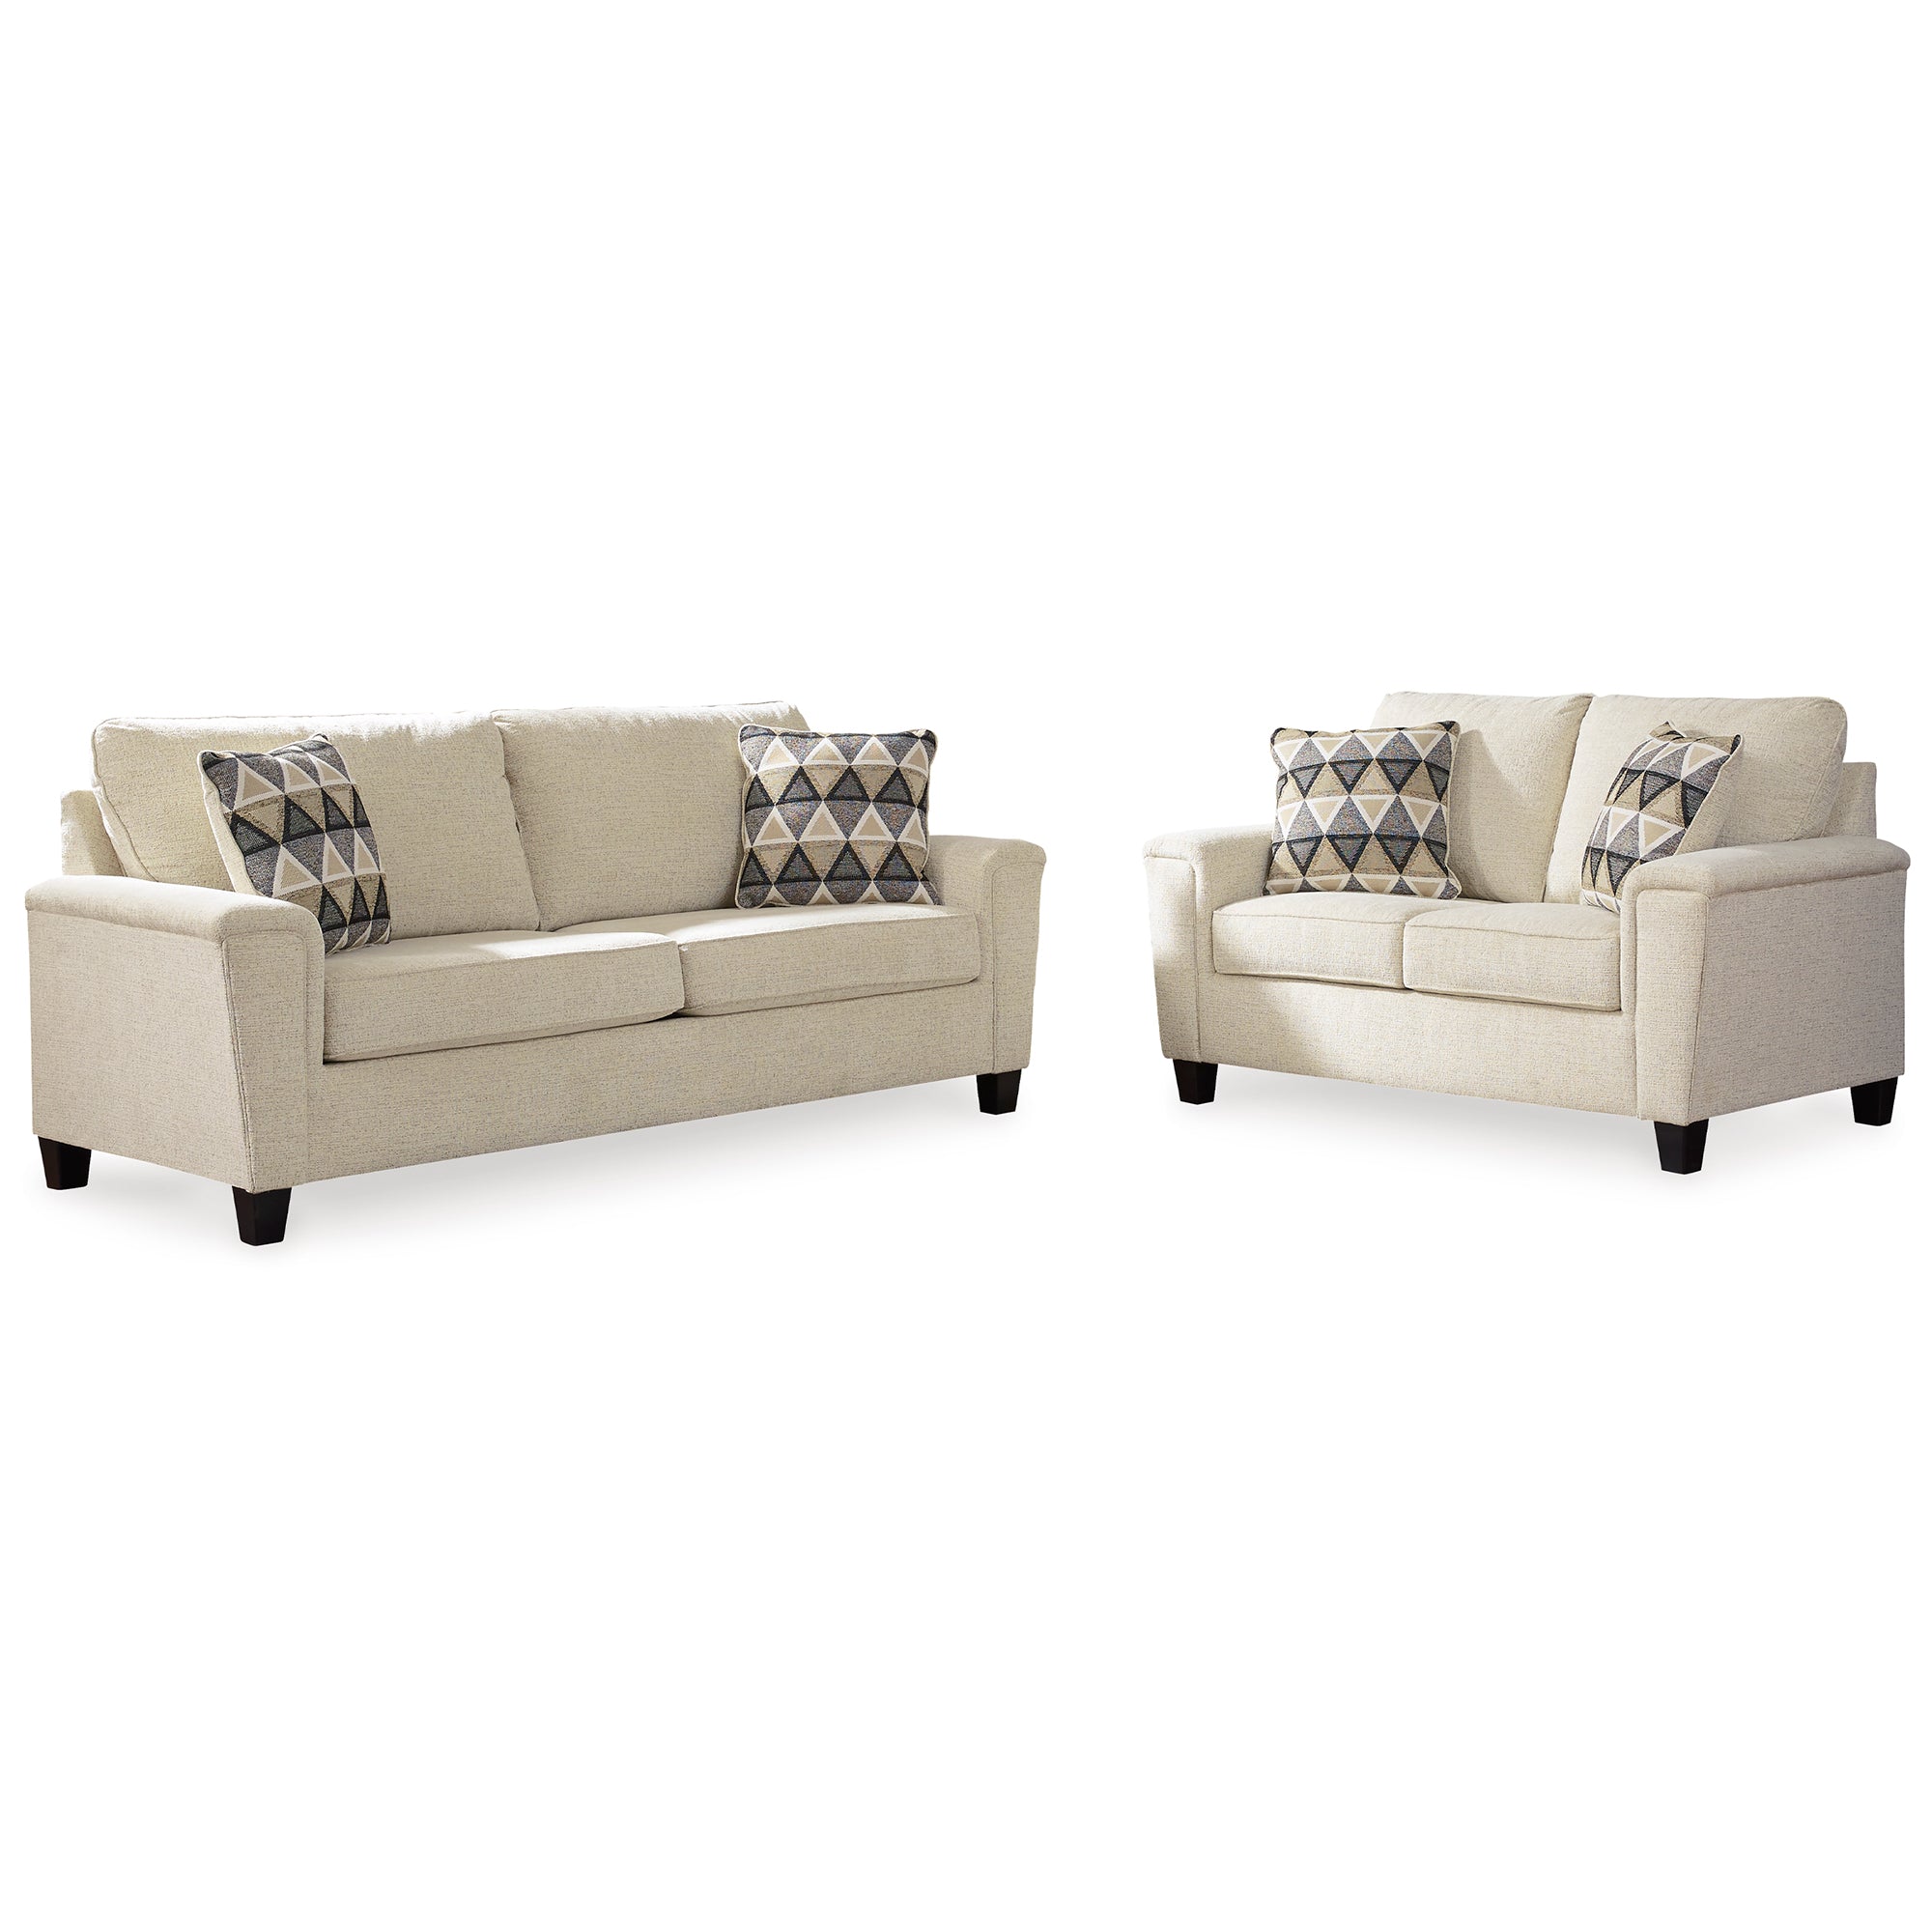 Abinger Sofa and Loveseat in Natural Color